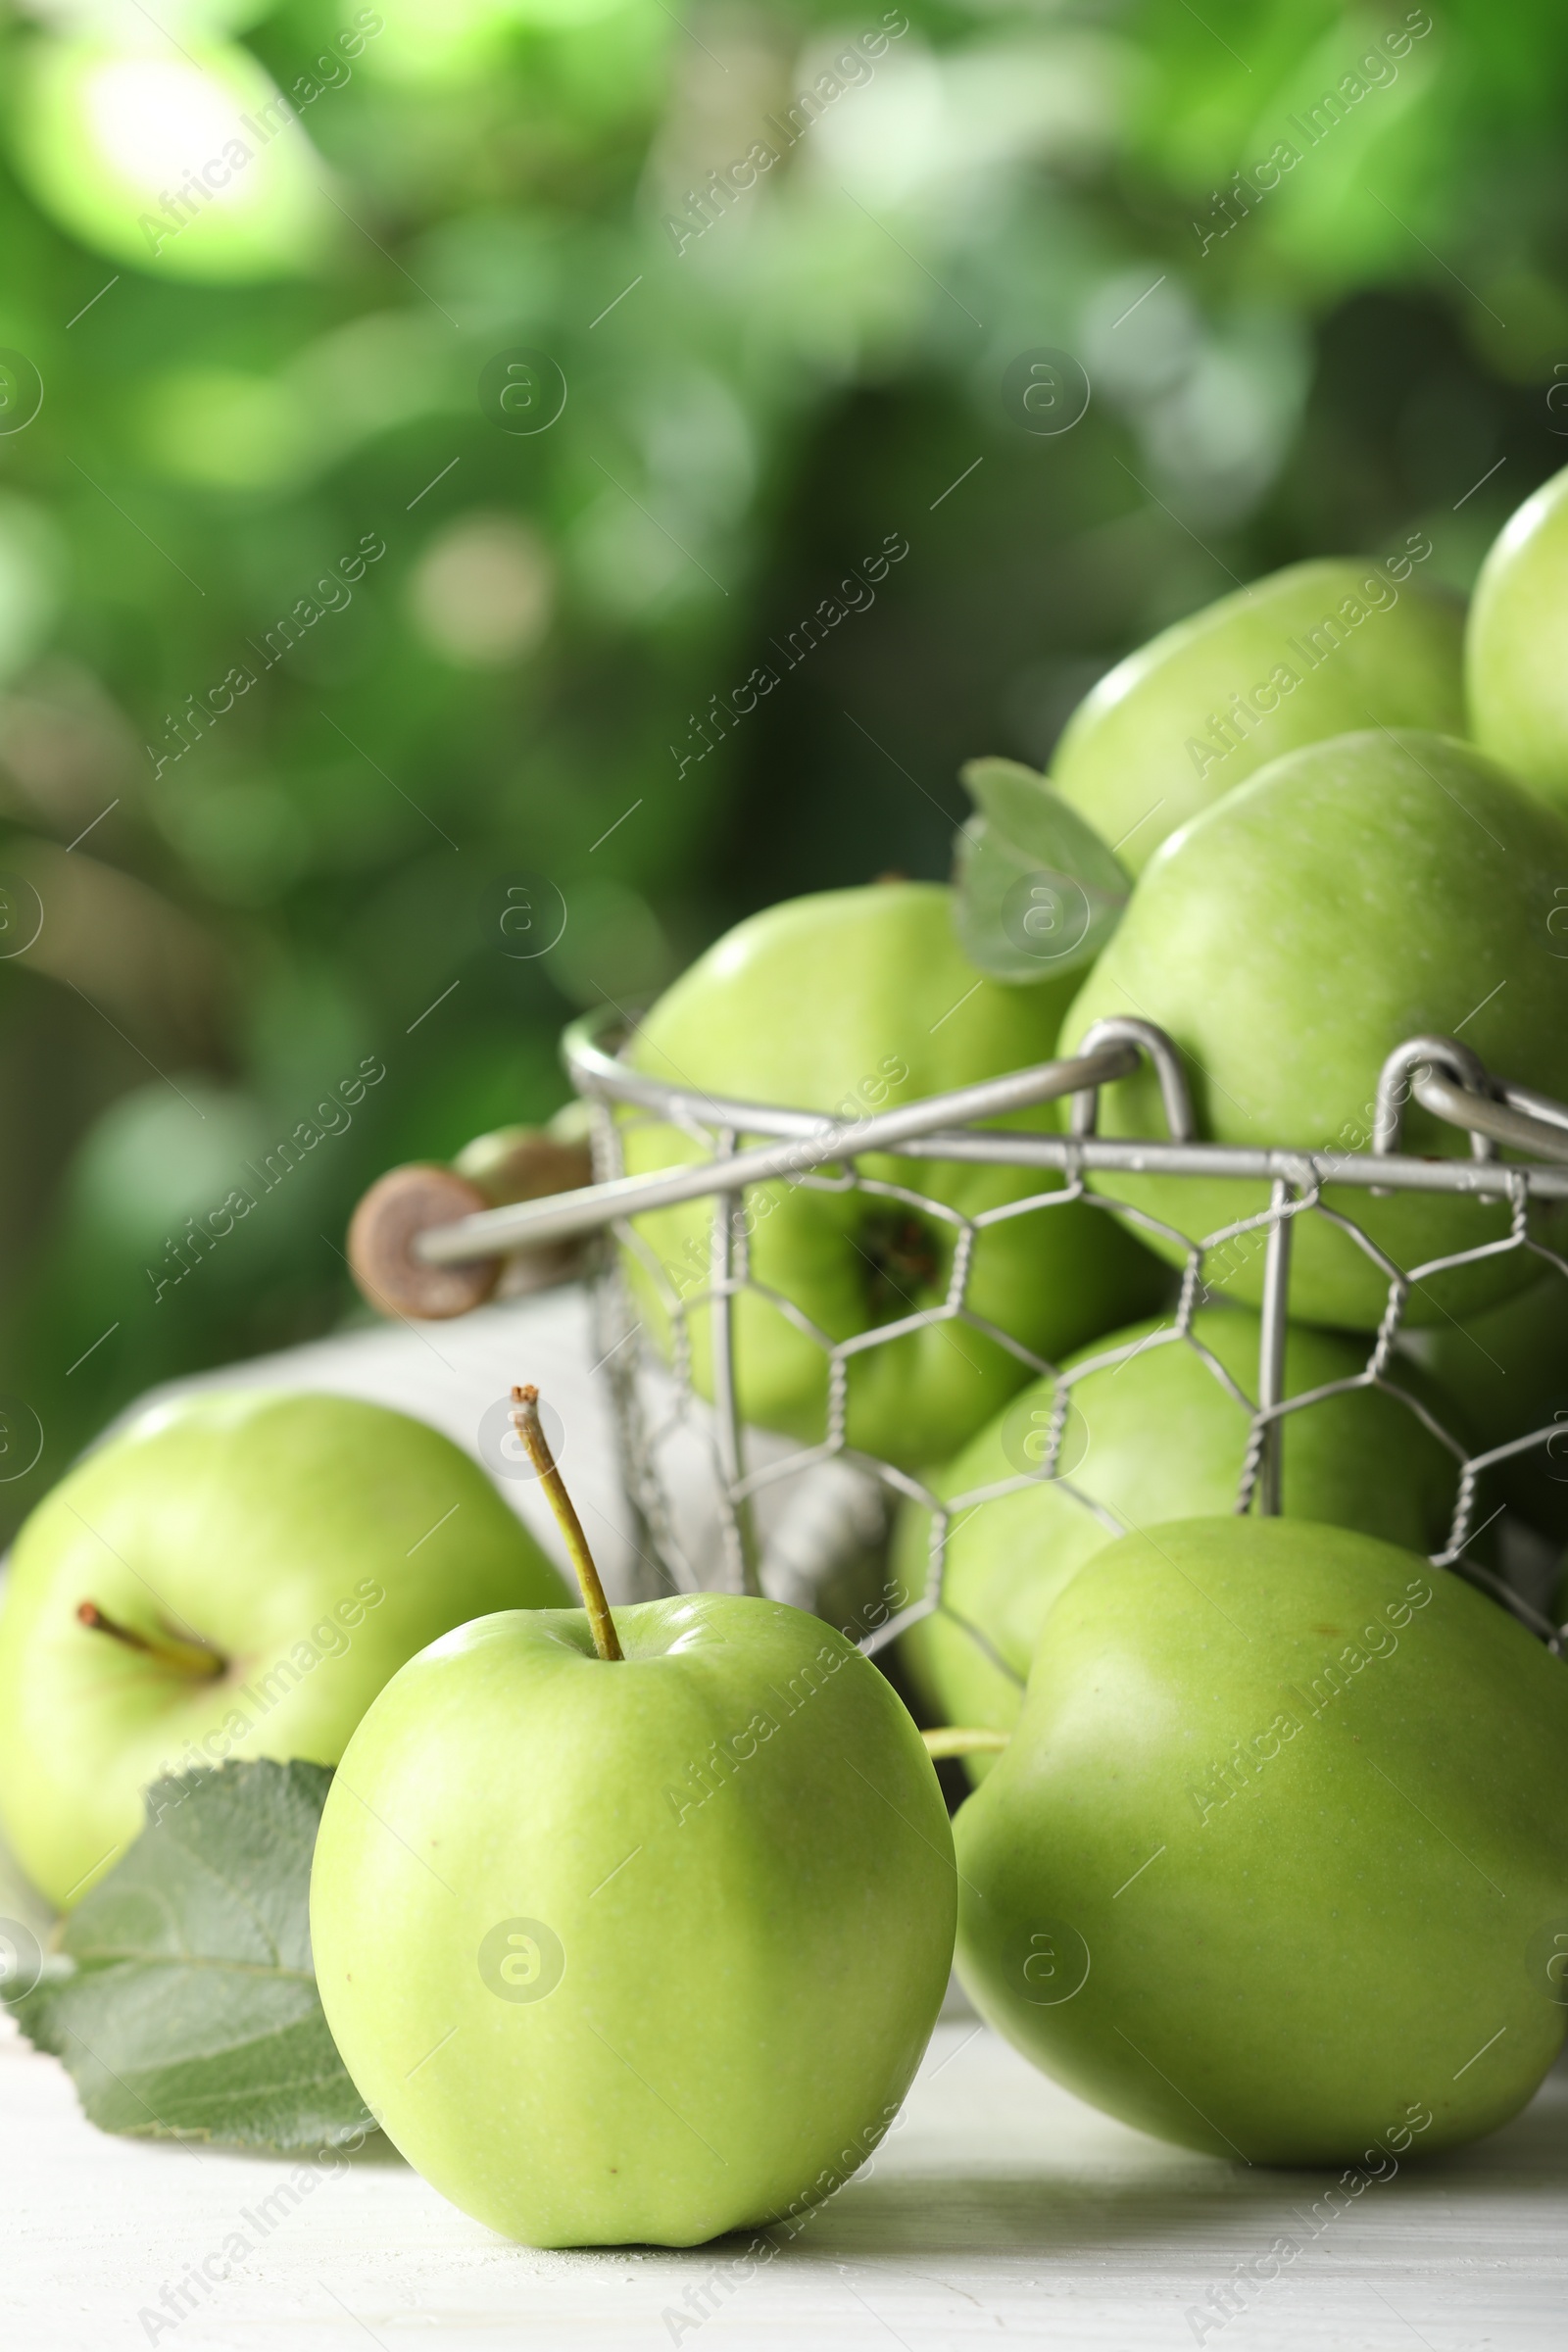 Photo of Ripe green apples on white table outdoors